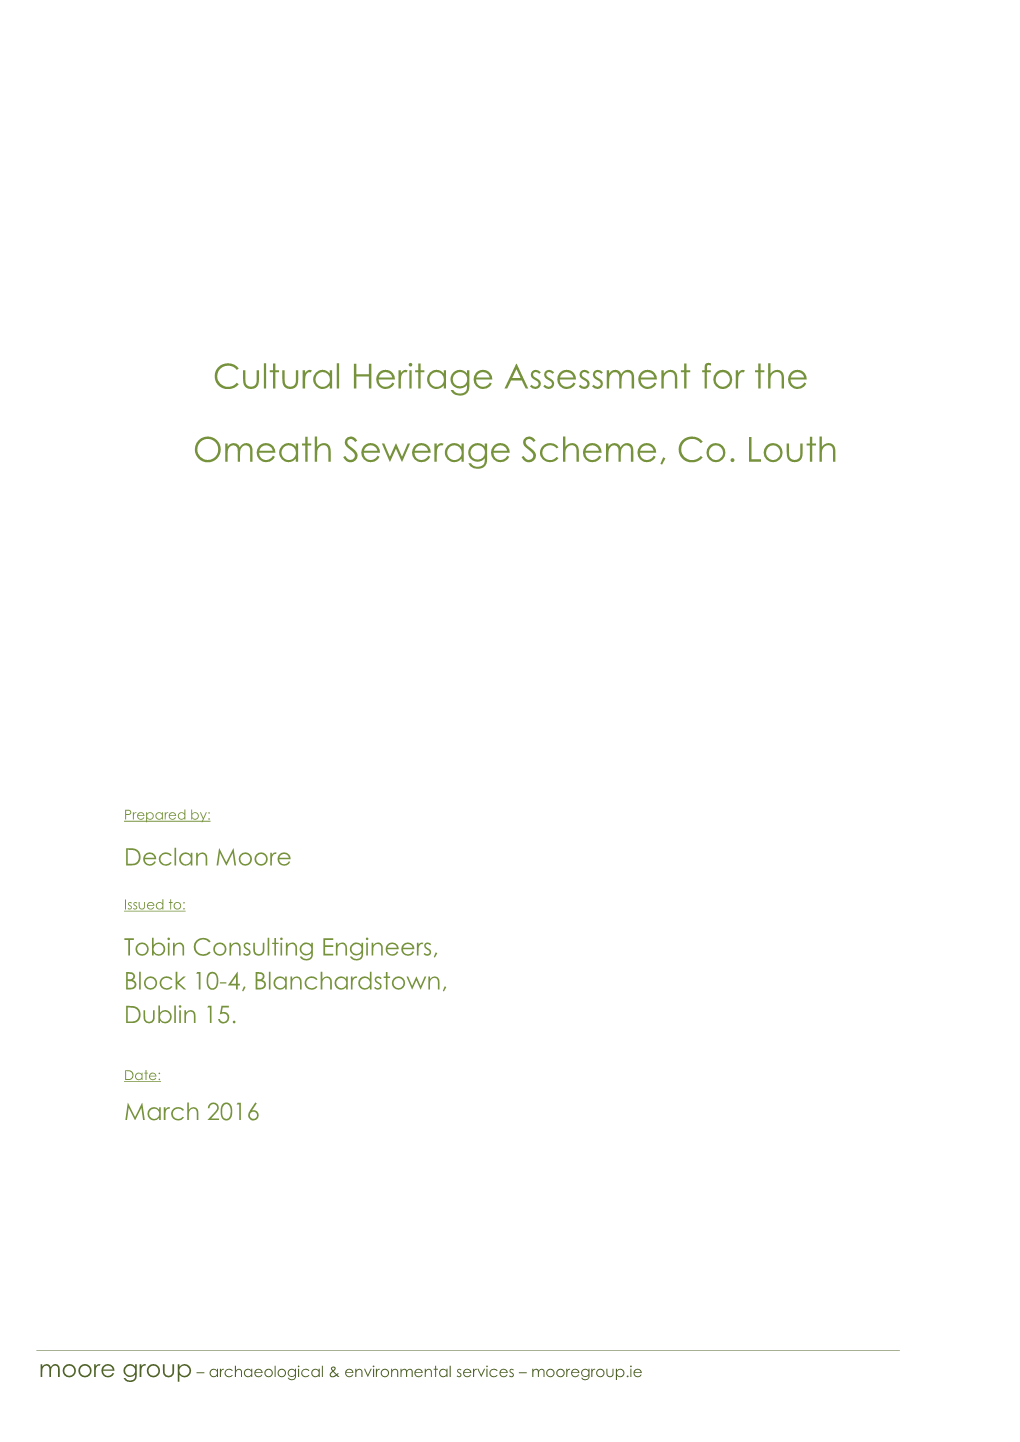 Cultural Heritage Assessment for the Omeath Sewerage Scheme, Co